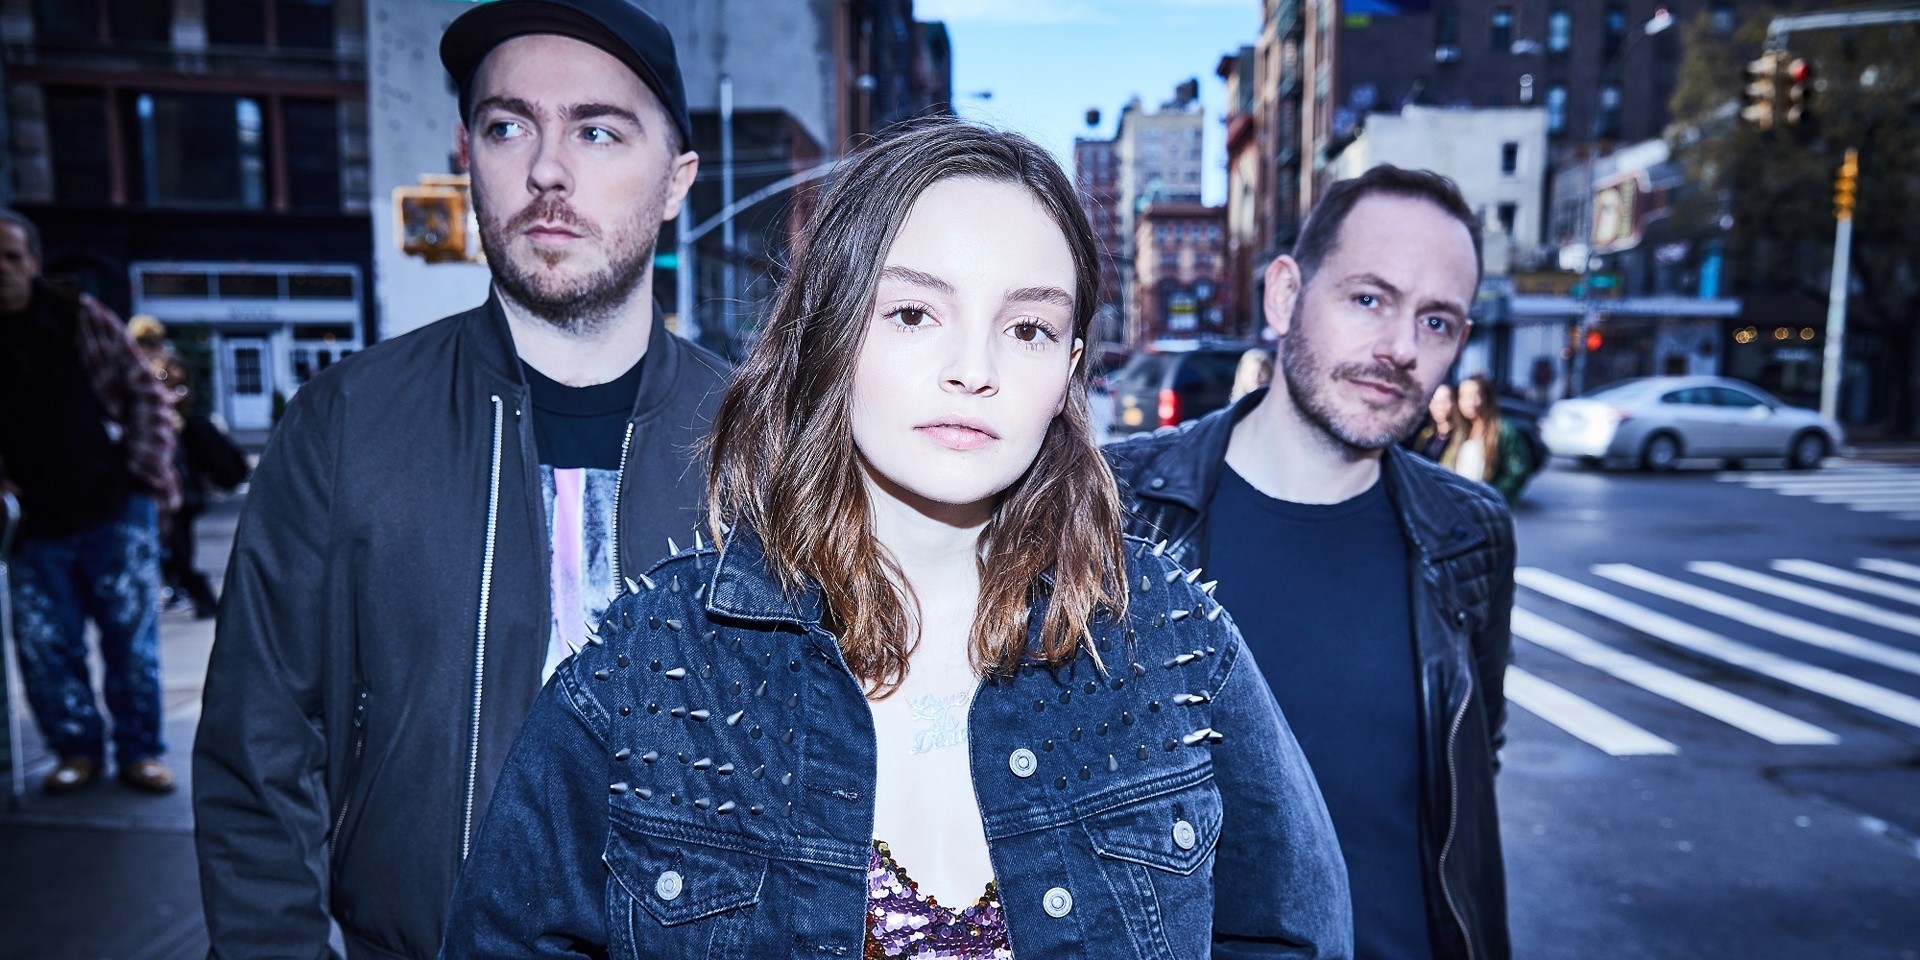 CHVRCHES' Manila concert has been canceled